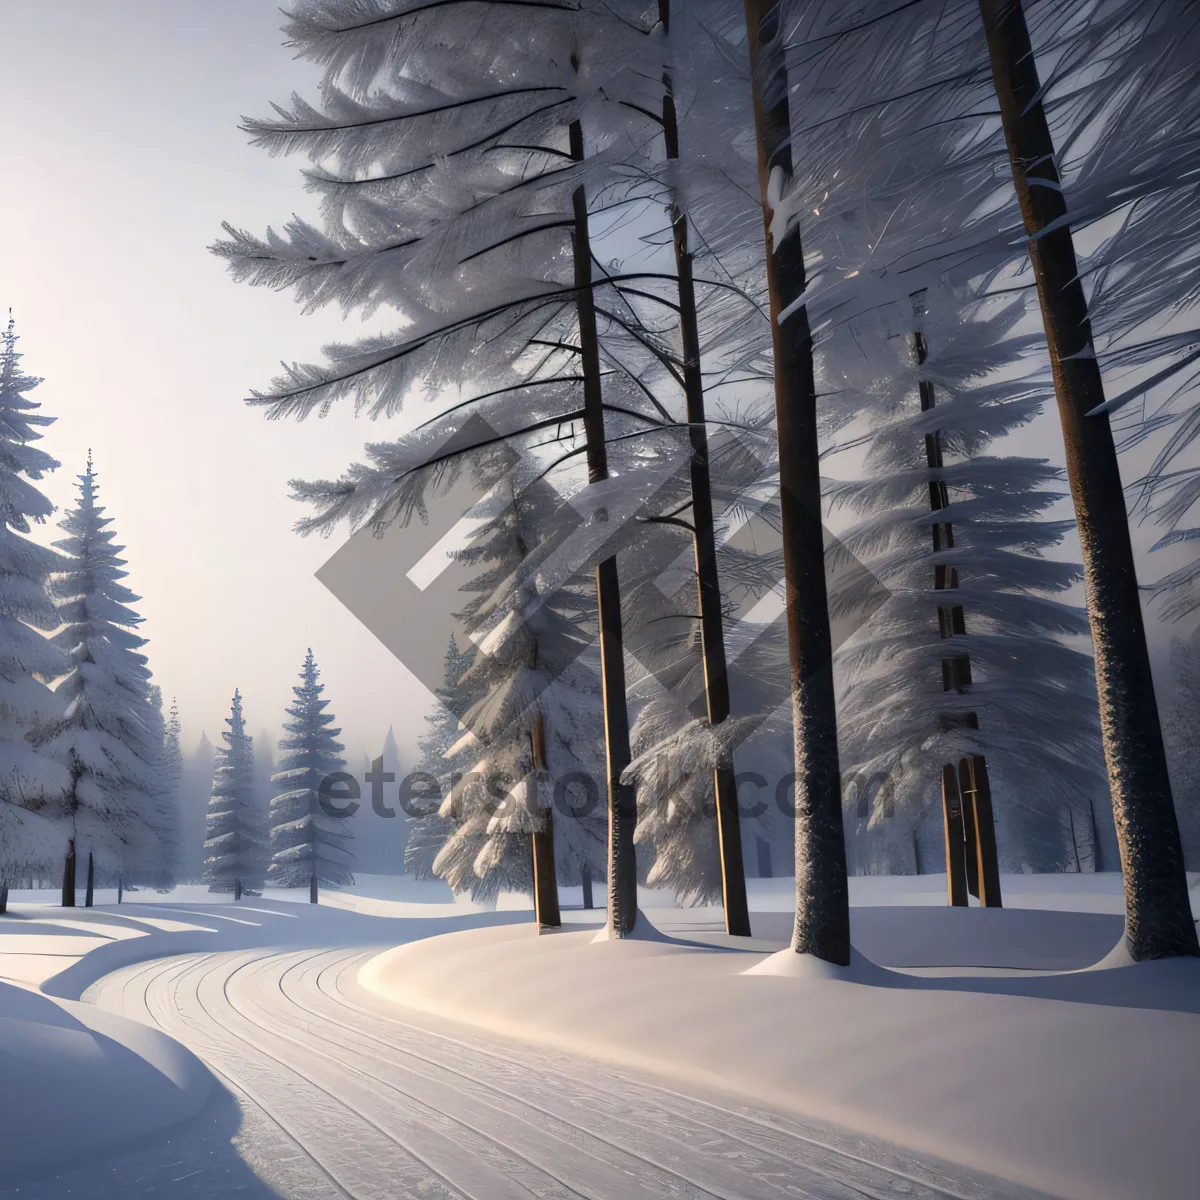 Picture of Snowy Winter Forest Landscape with Icy Trees